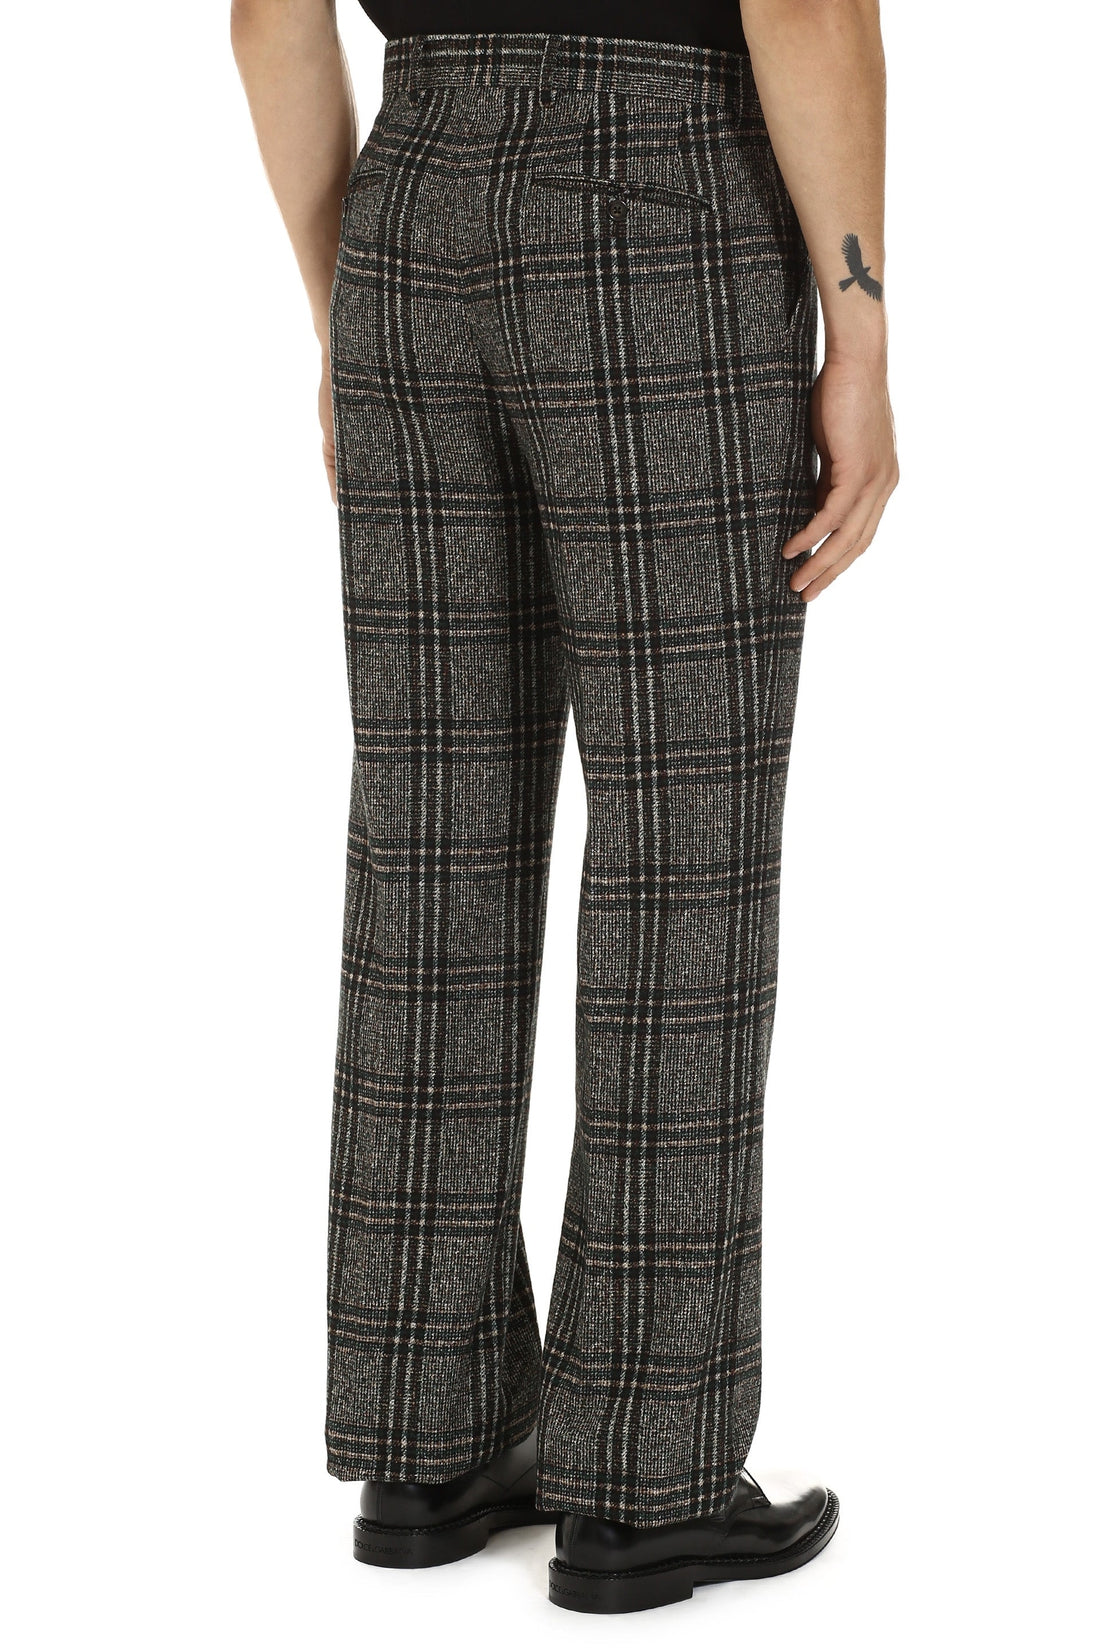 Dolce & Gabbana-OUTLET-SALE-Prince of Wales check trousers-ARCHIVIST